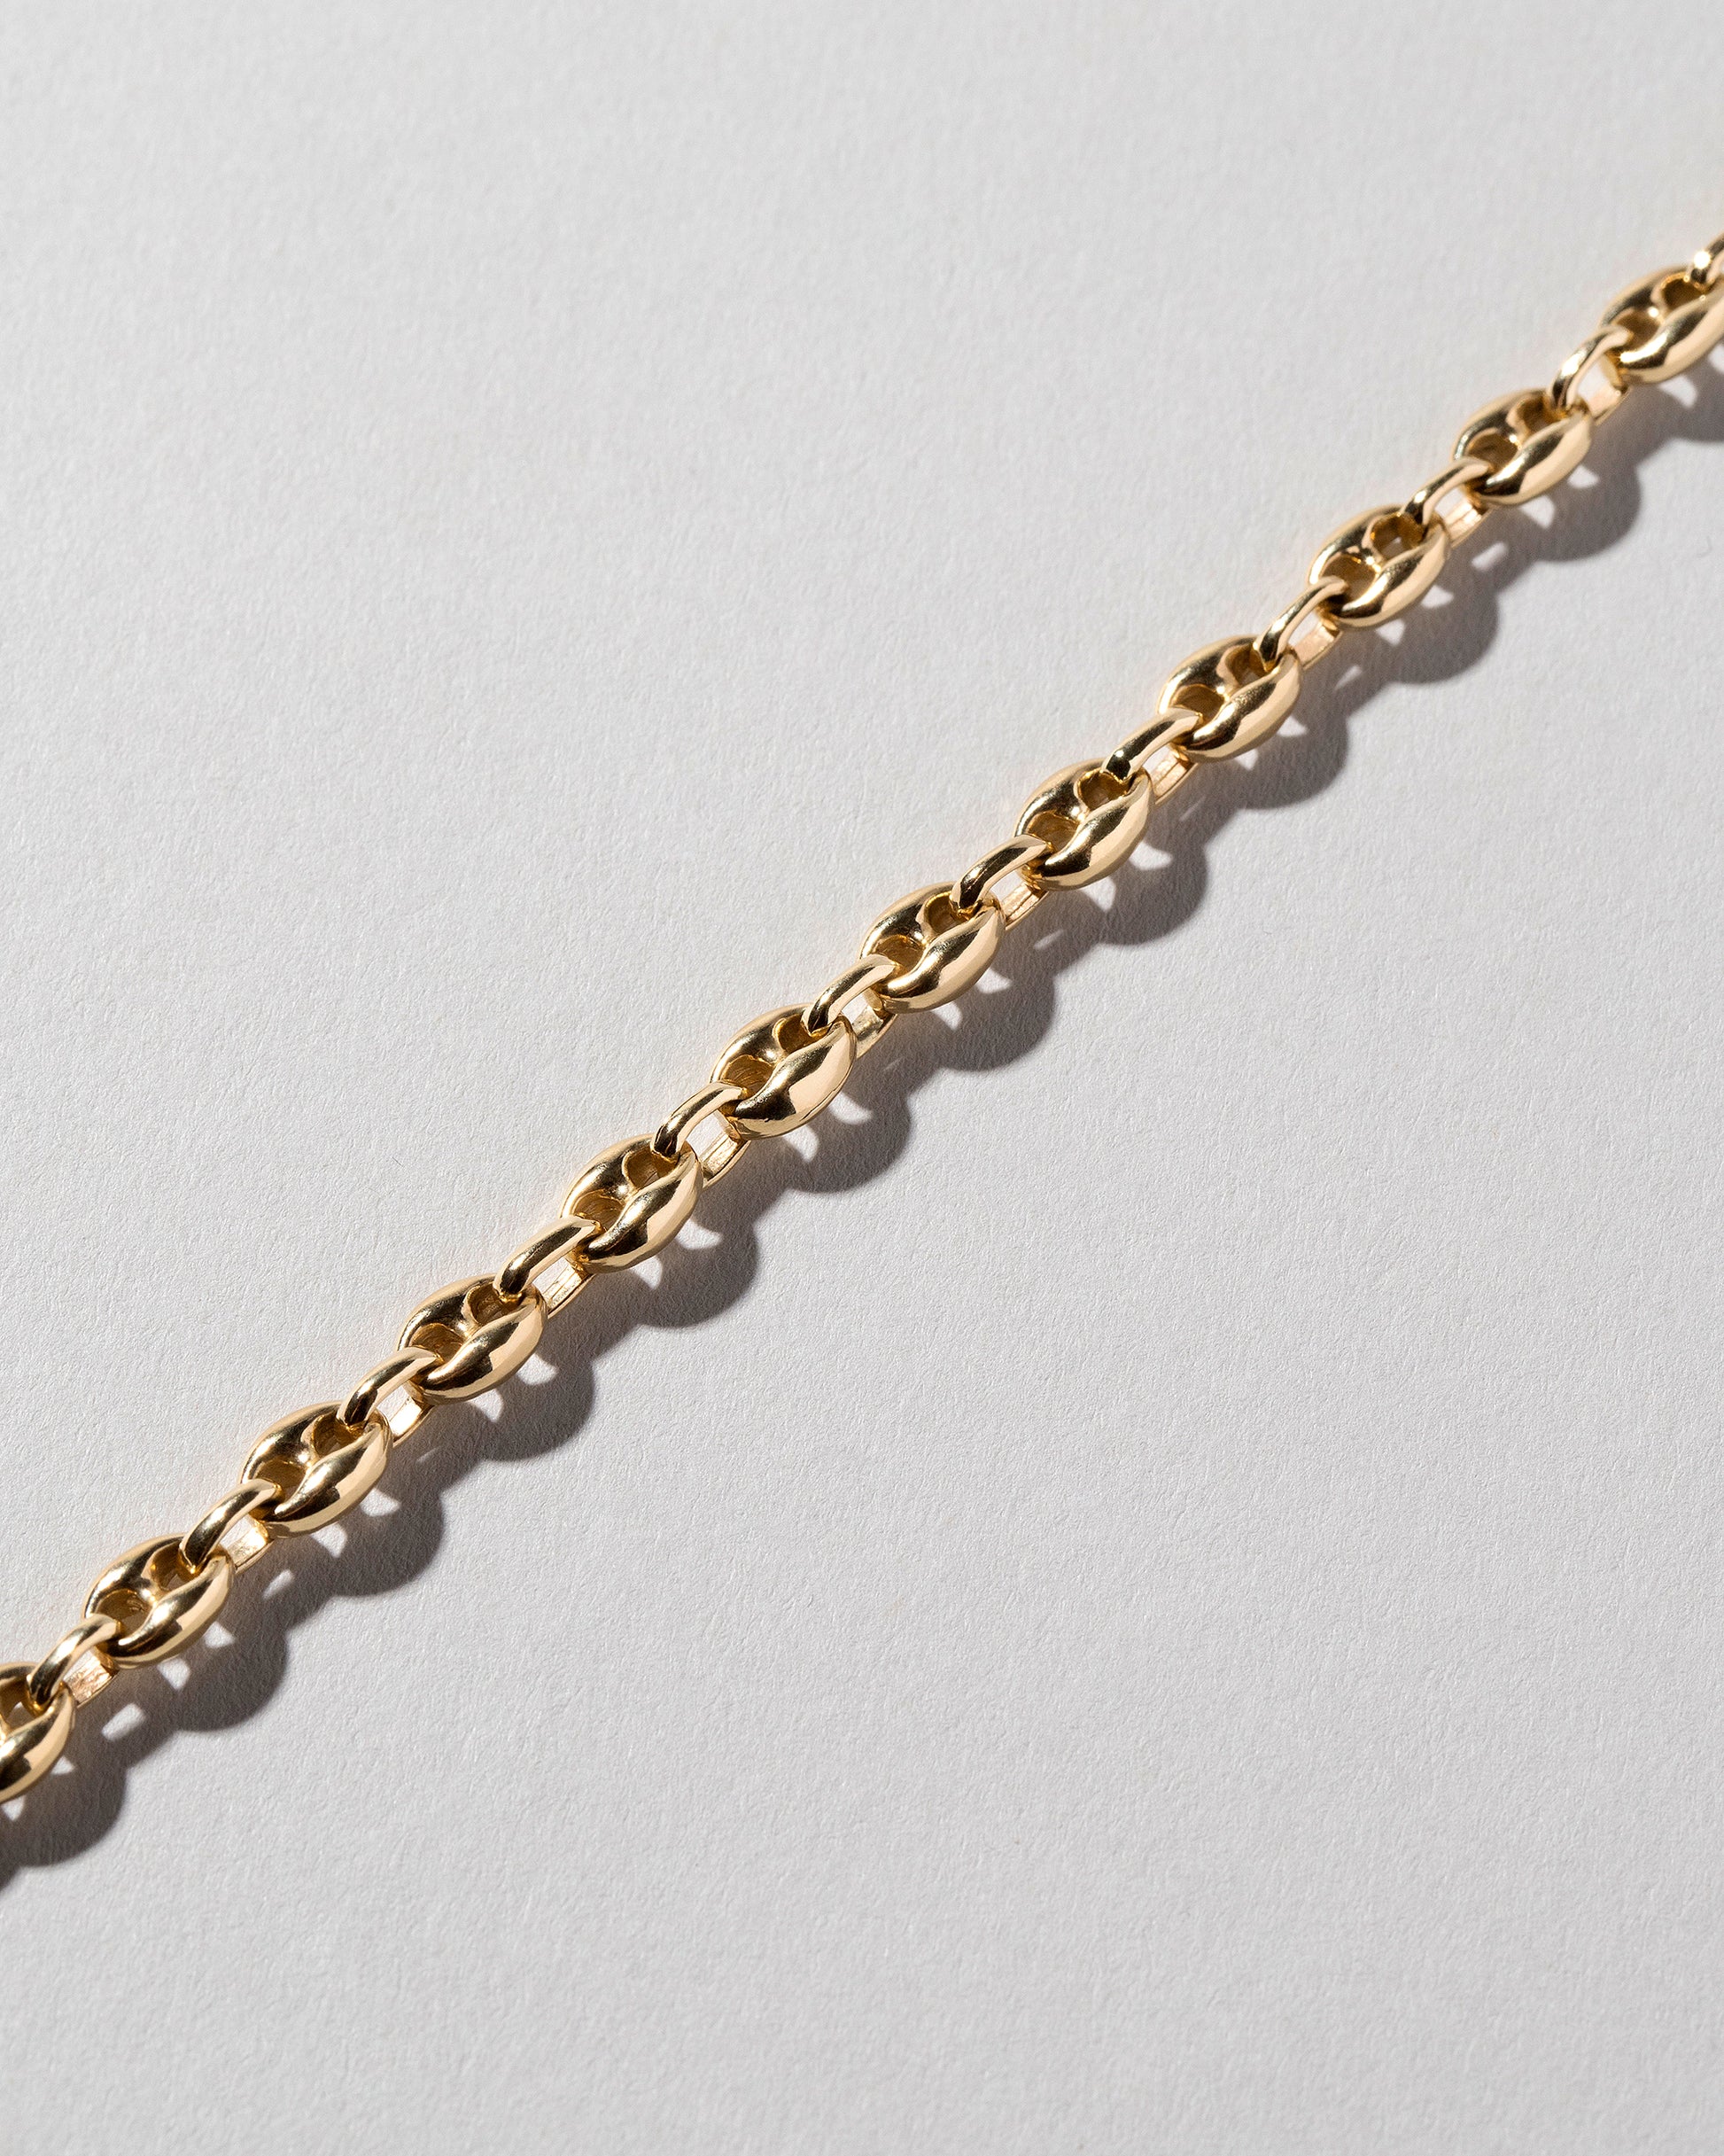 Closeup details of the Segmented Chain Necklace on light color background.